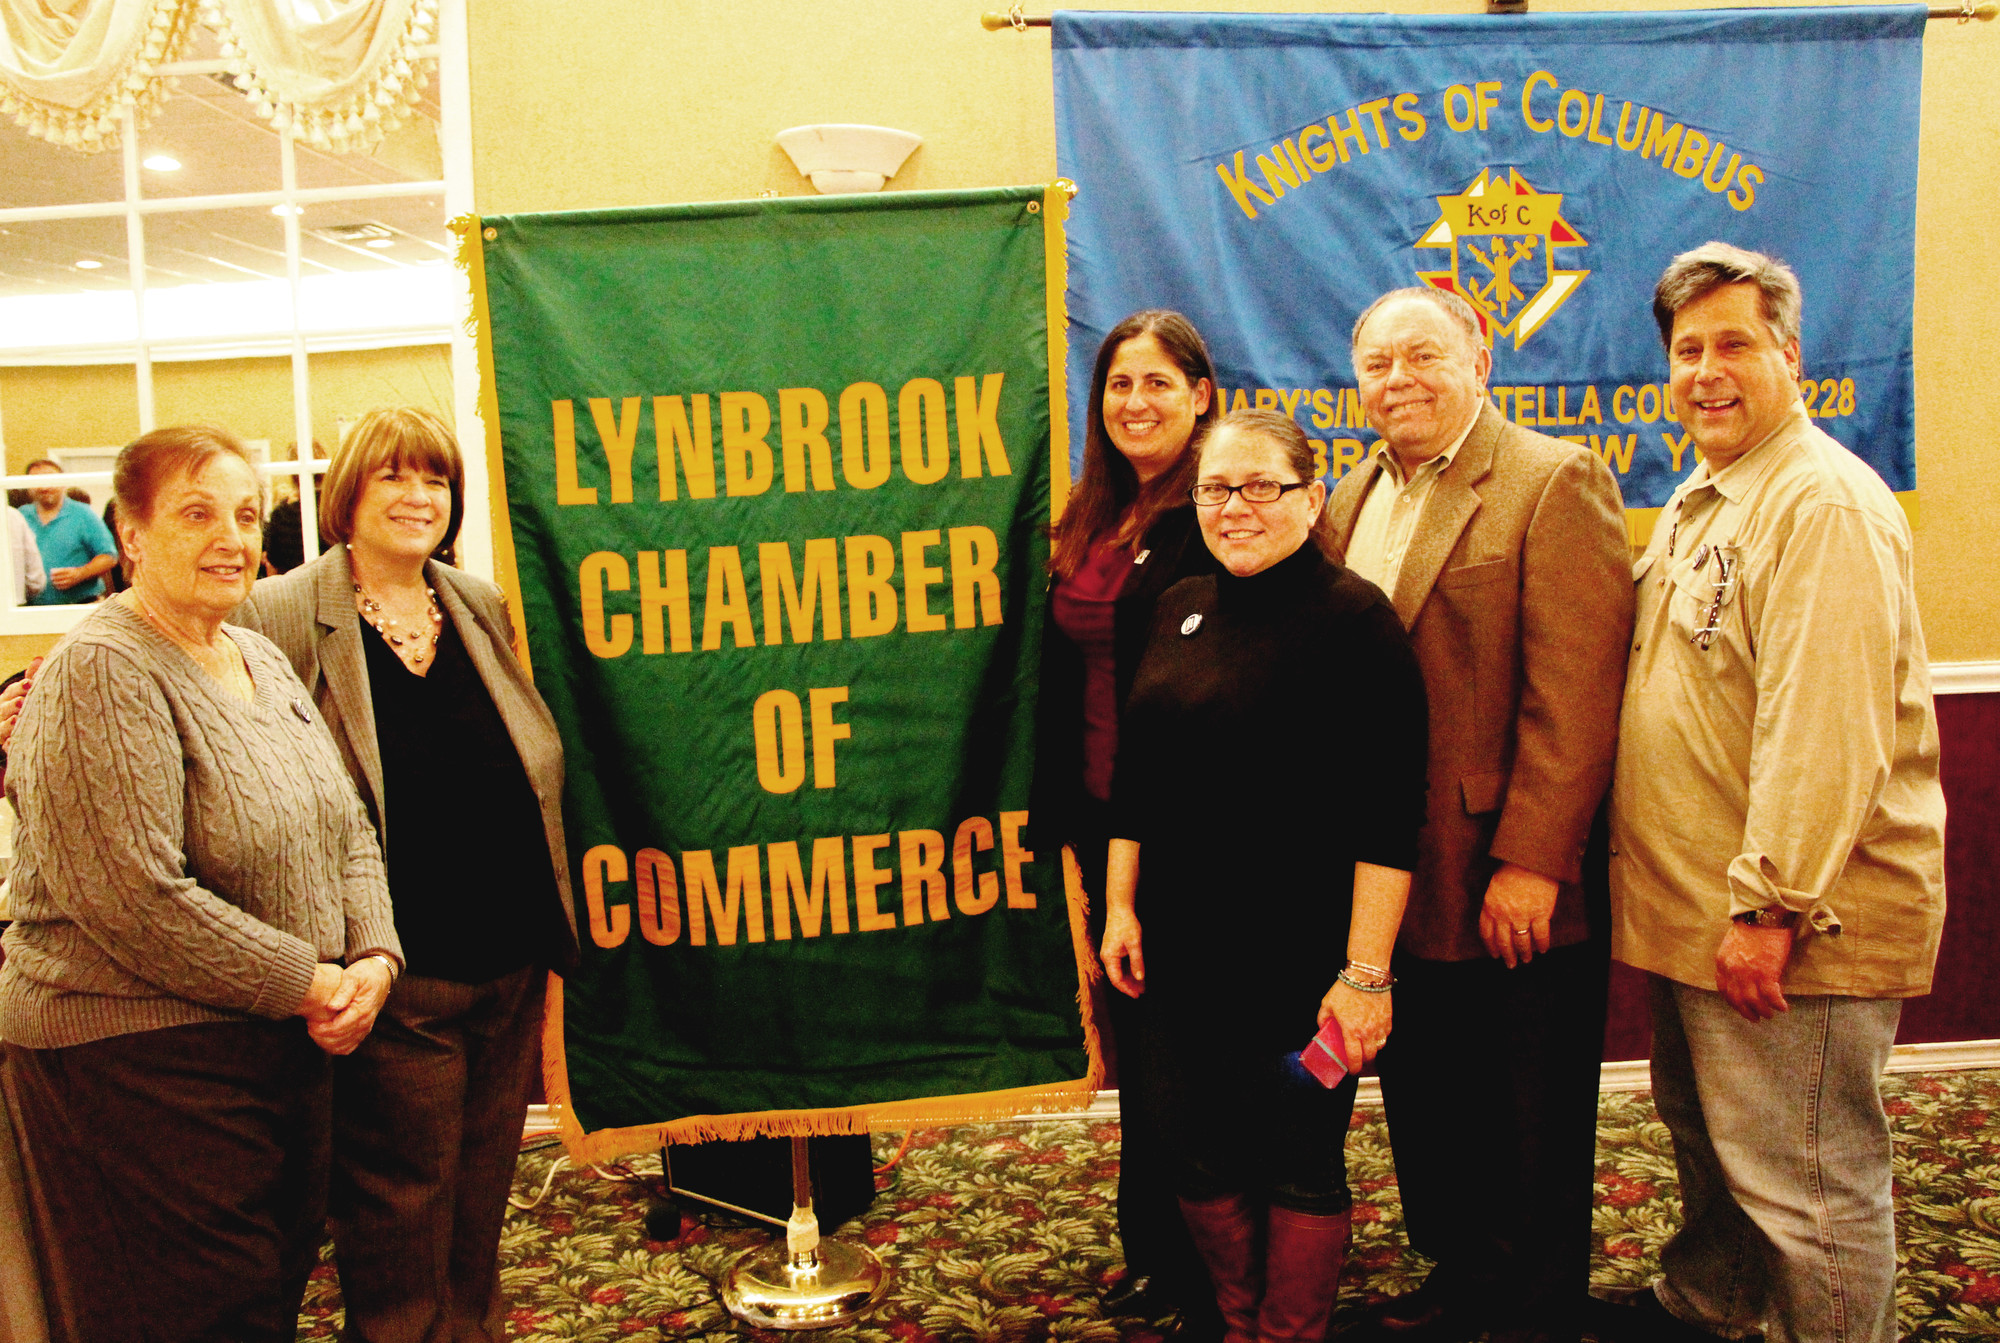 The Lynbrook Chamber of Commerce Members put together another delicious successful Taste of Lynbrook. The committee included, from left, Carol Burak, Linda Stephenson, Denise Rogers, Jennifer Derrig, Bill Albergo and Stephen Wangel.